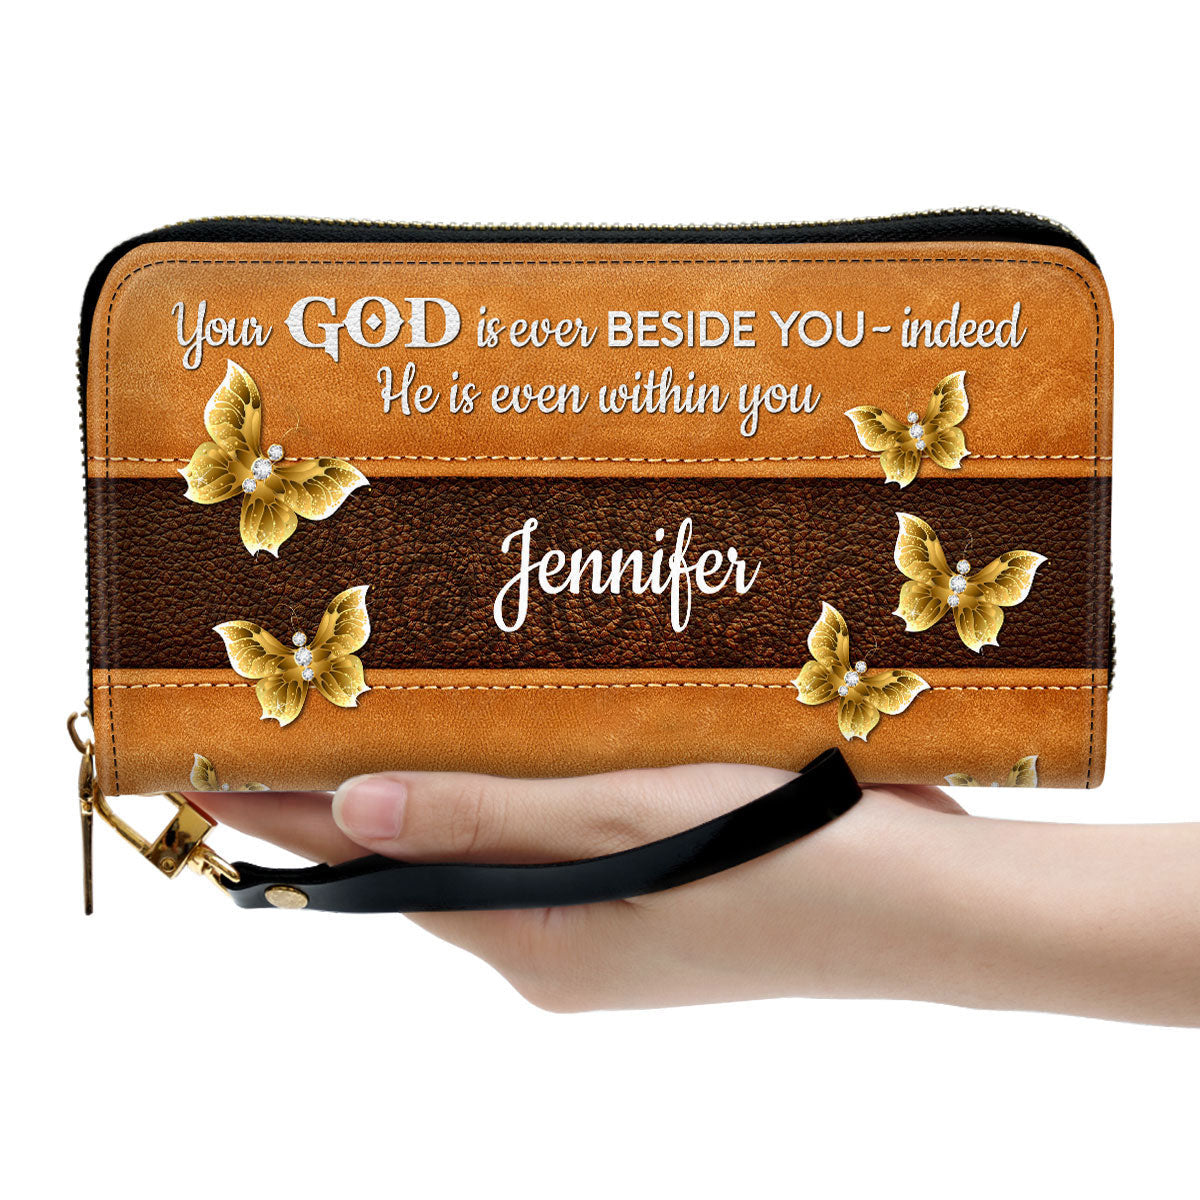 Your God Is Ever Beside You Butterfly Clutch Purse For Women - Personalized Name - Christian Gifts For Women